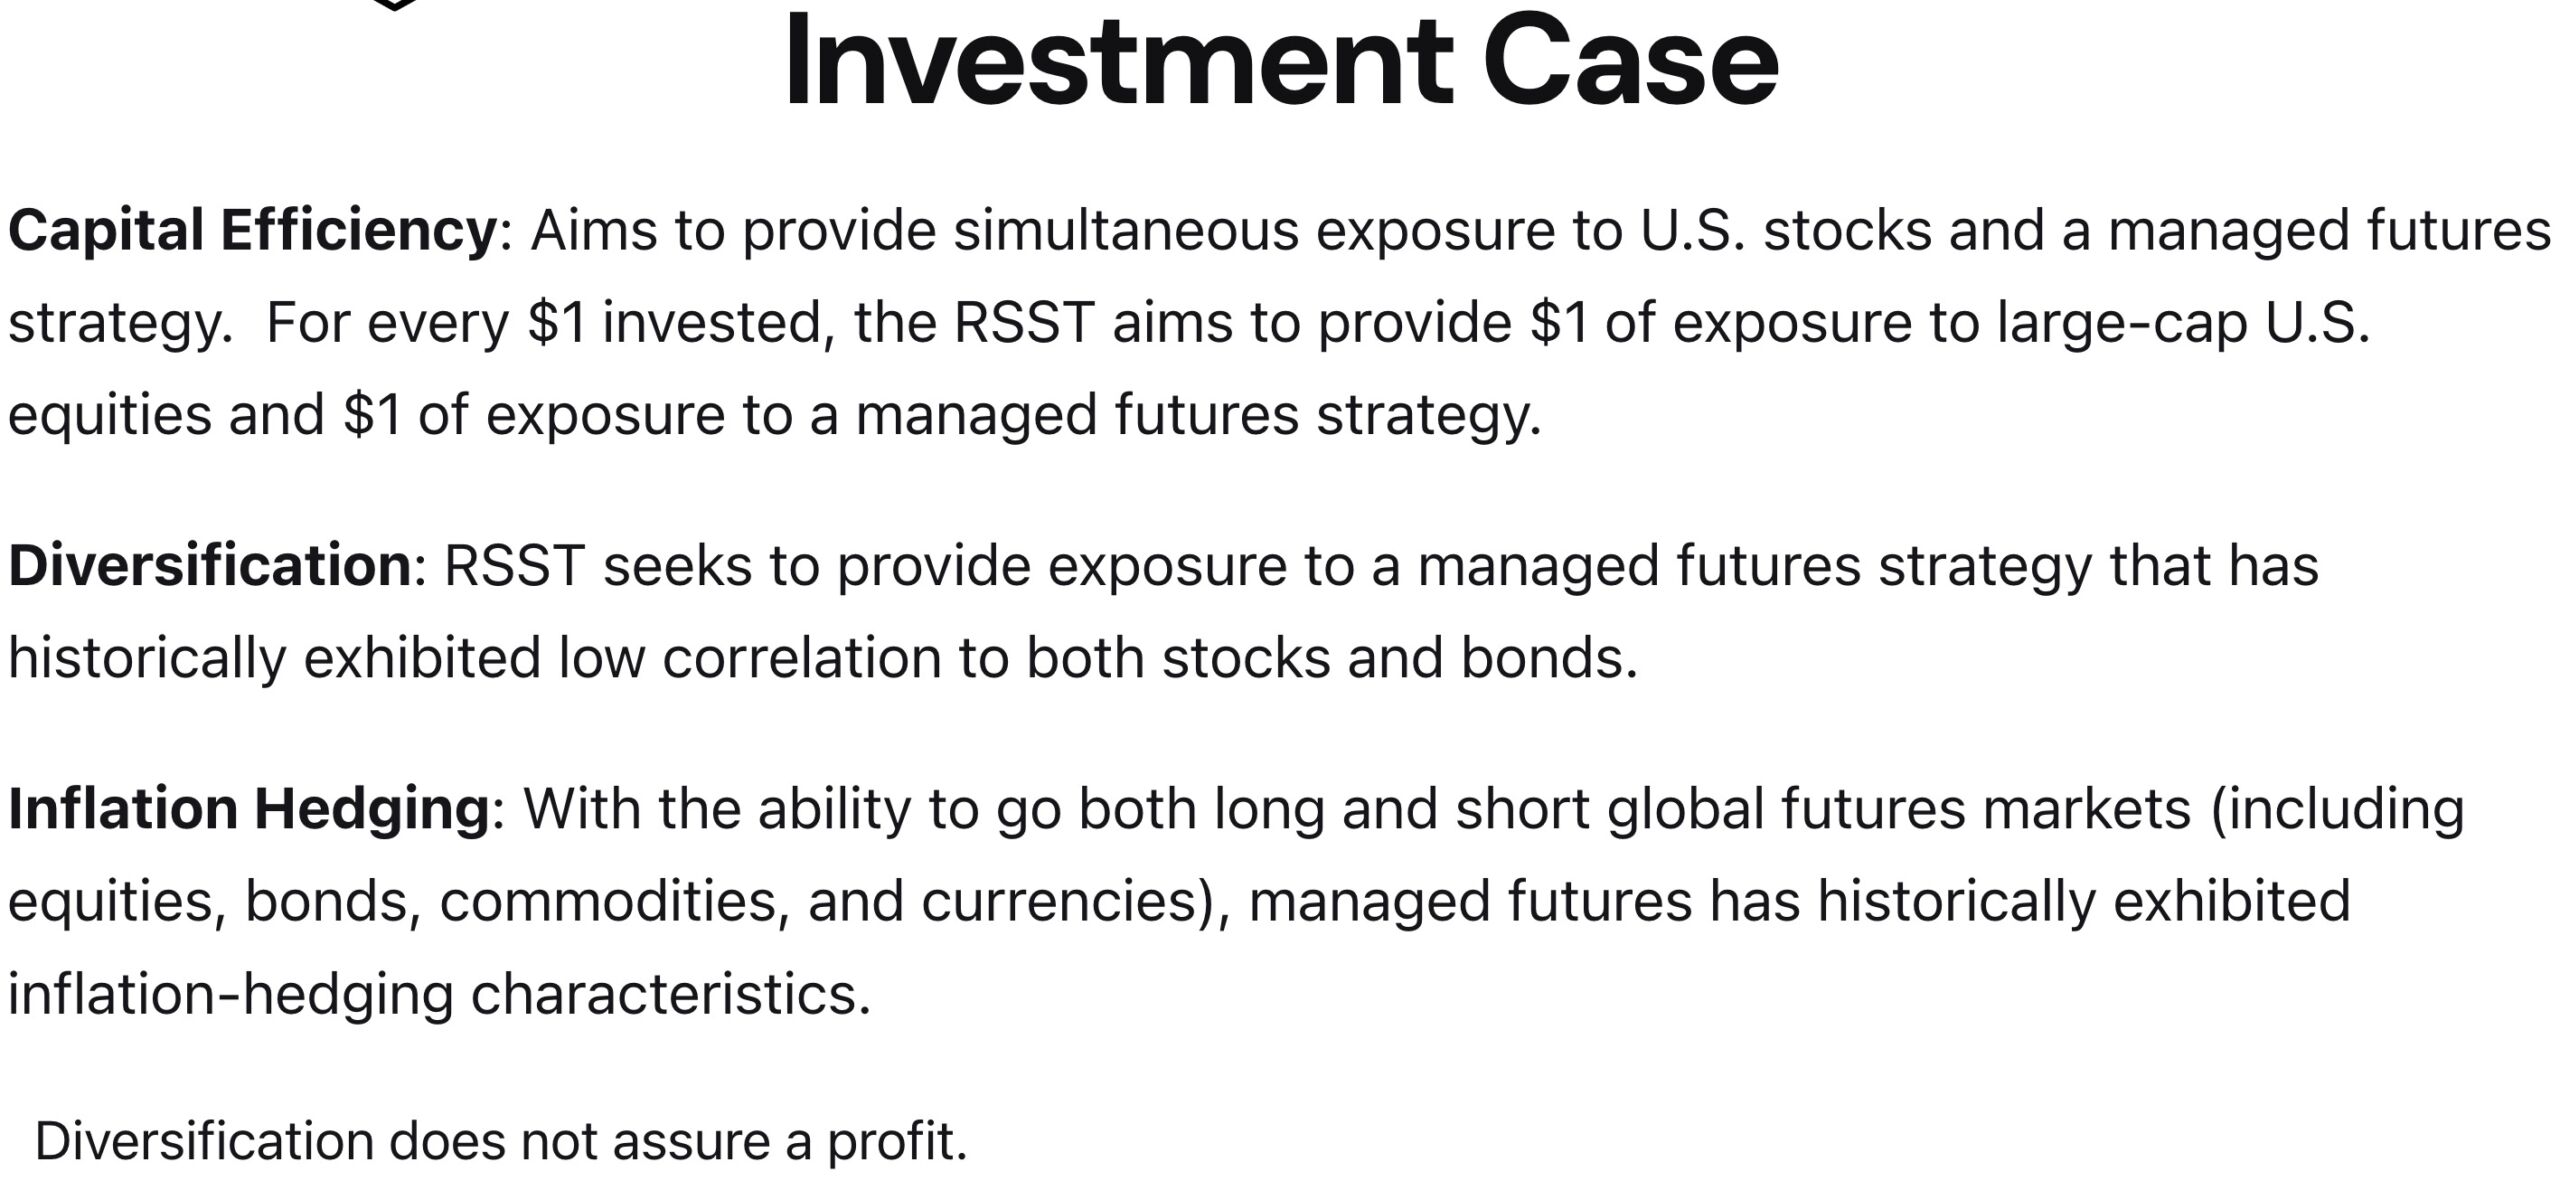 Return Stacked US Stocks and Managed Futures Investment Case for RSST ETF: 1) Capital Efficiency 2) Diversification 3) Inflation Hedging 